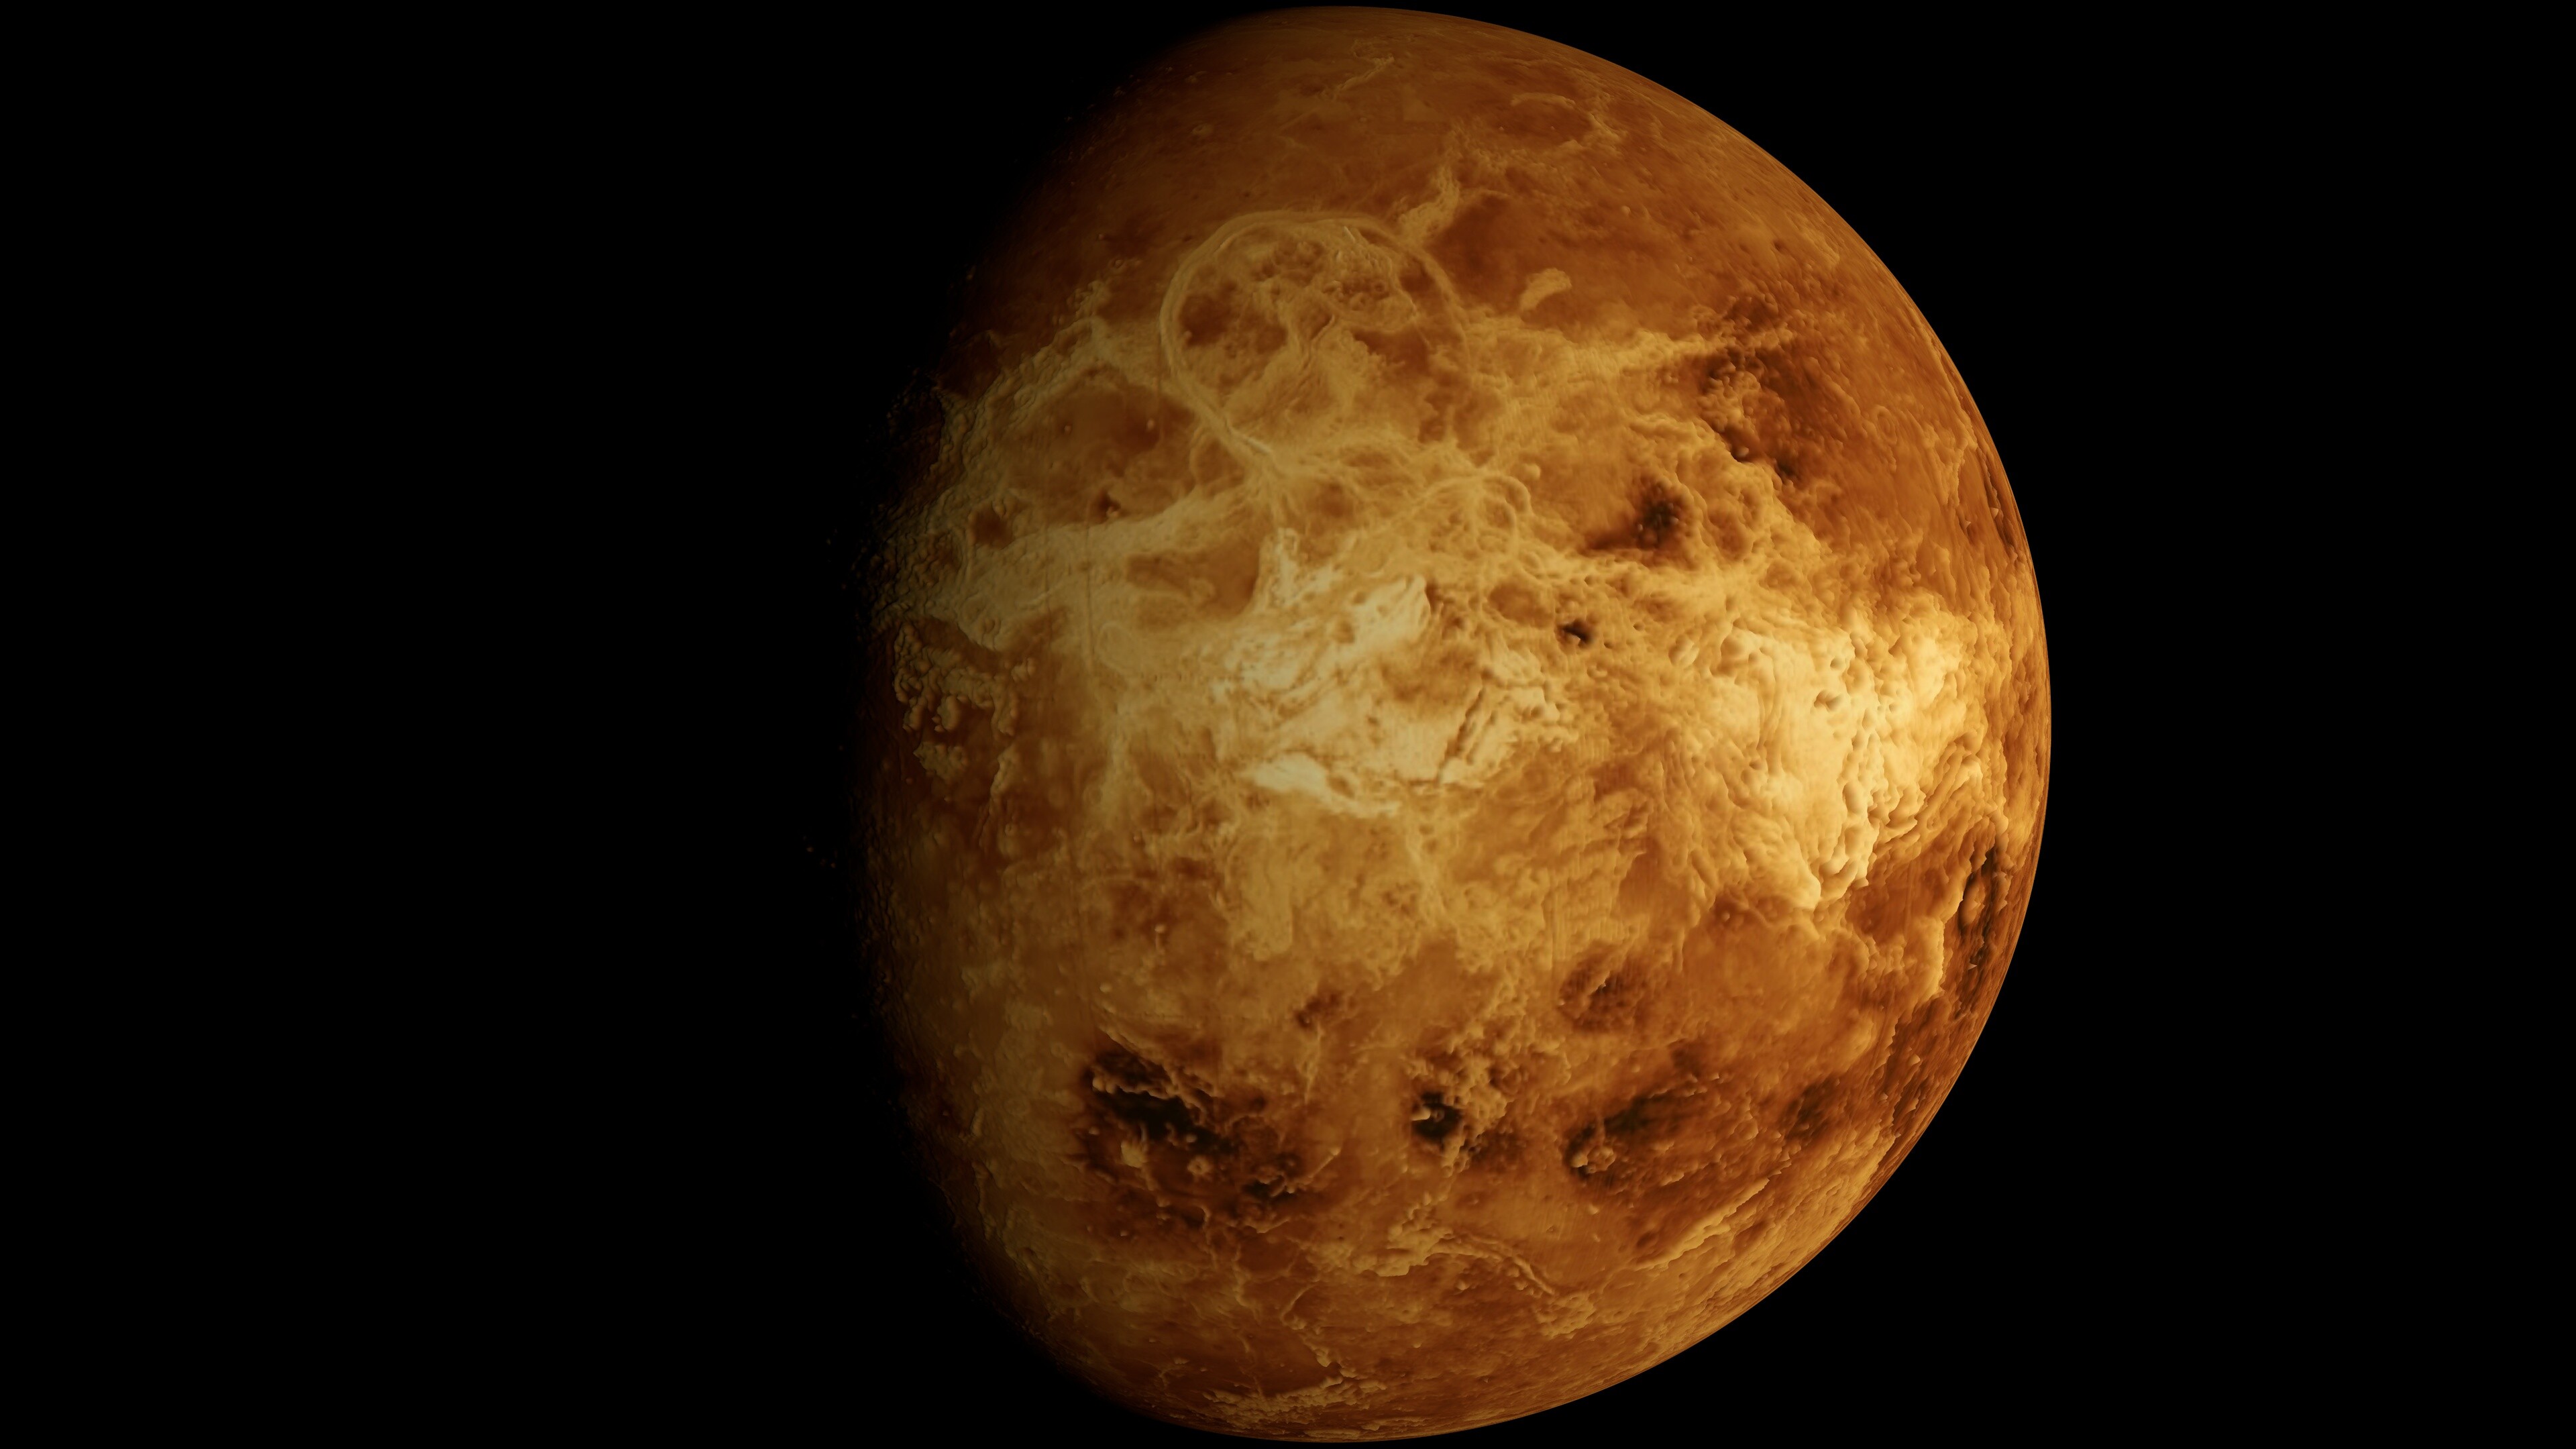 Venus: Space, The brightest natural object in Earth's sky aside from the Sun and Moon. 3840x2160 4K Wallpaper.